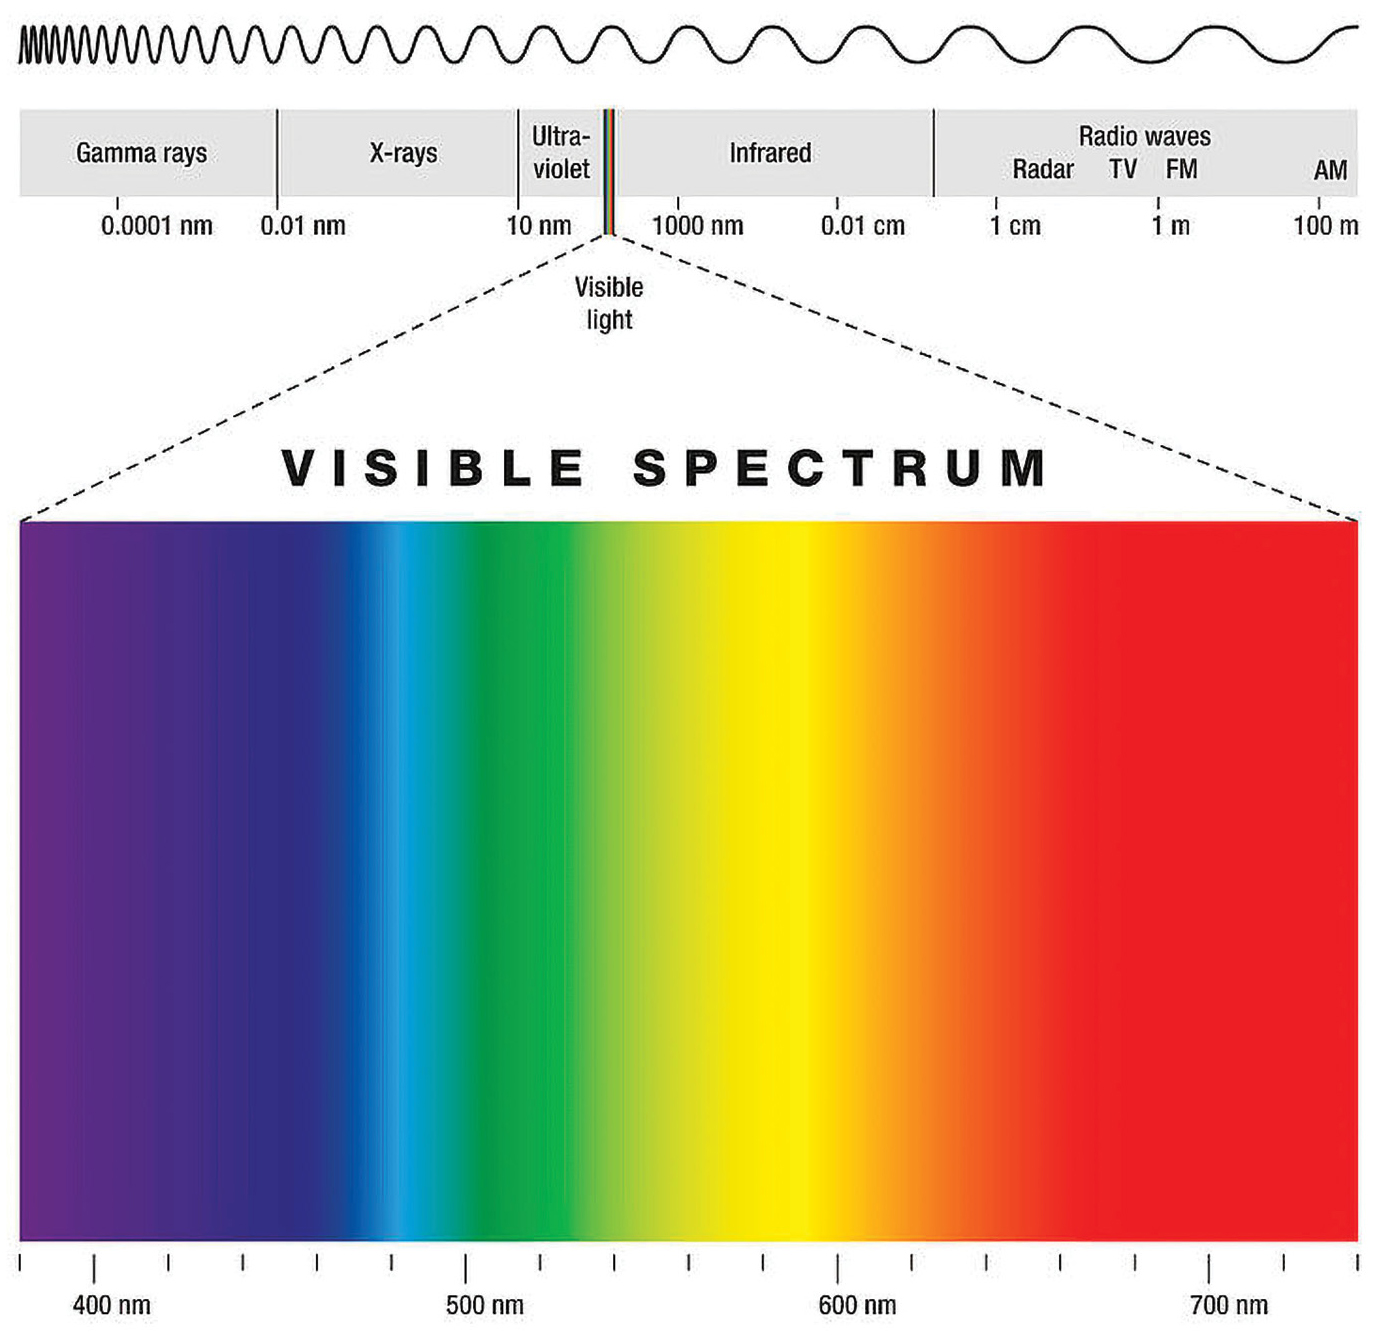 Figure 1 The visible spectrum of light is a range of wavelengths that the human eye can sense, ranging from 370 to 700 nm. On the left end of the spectrum, violet wavelengths have the shortest wavelengths, ranging from 370 to 400 nm. On the right or red end of the spectrum, these “long” electromagnetic waves range 630 to 700 nm. Image created by P.H. Furian (https://bit.ly/3wLXfrr).